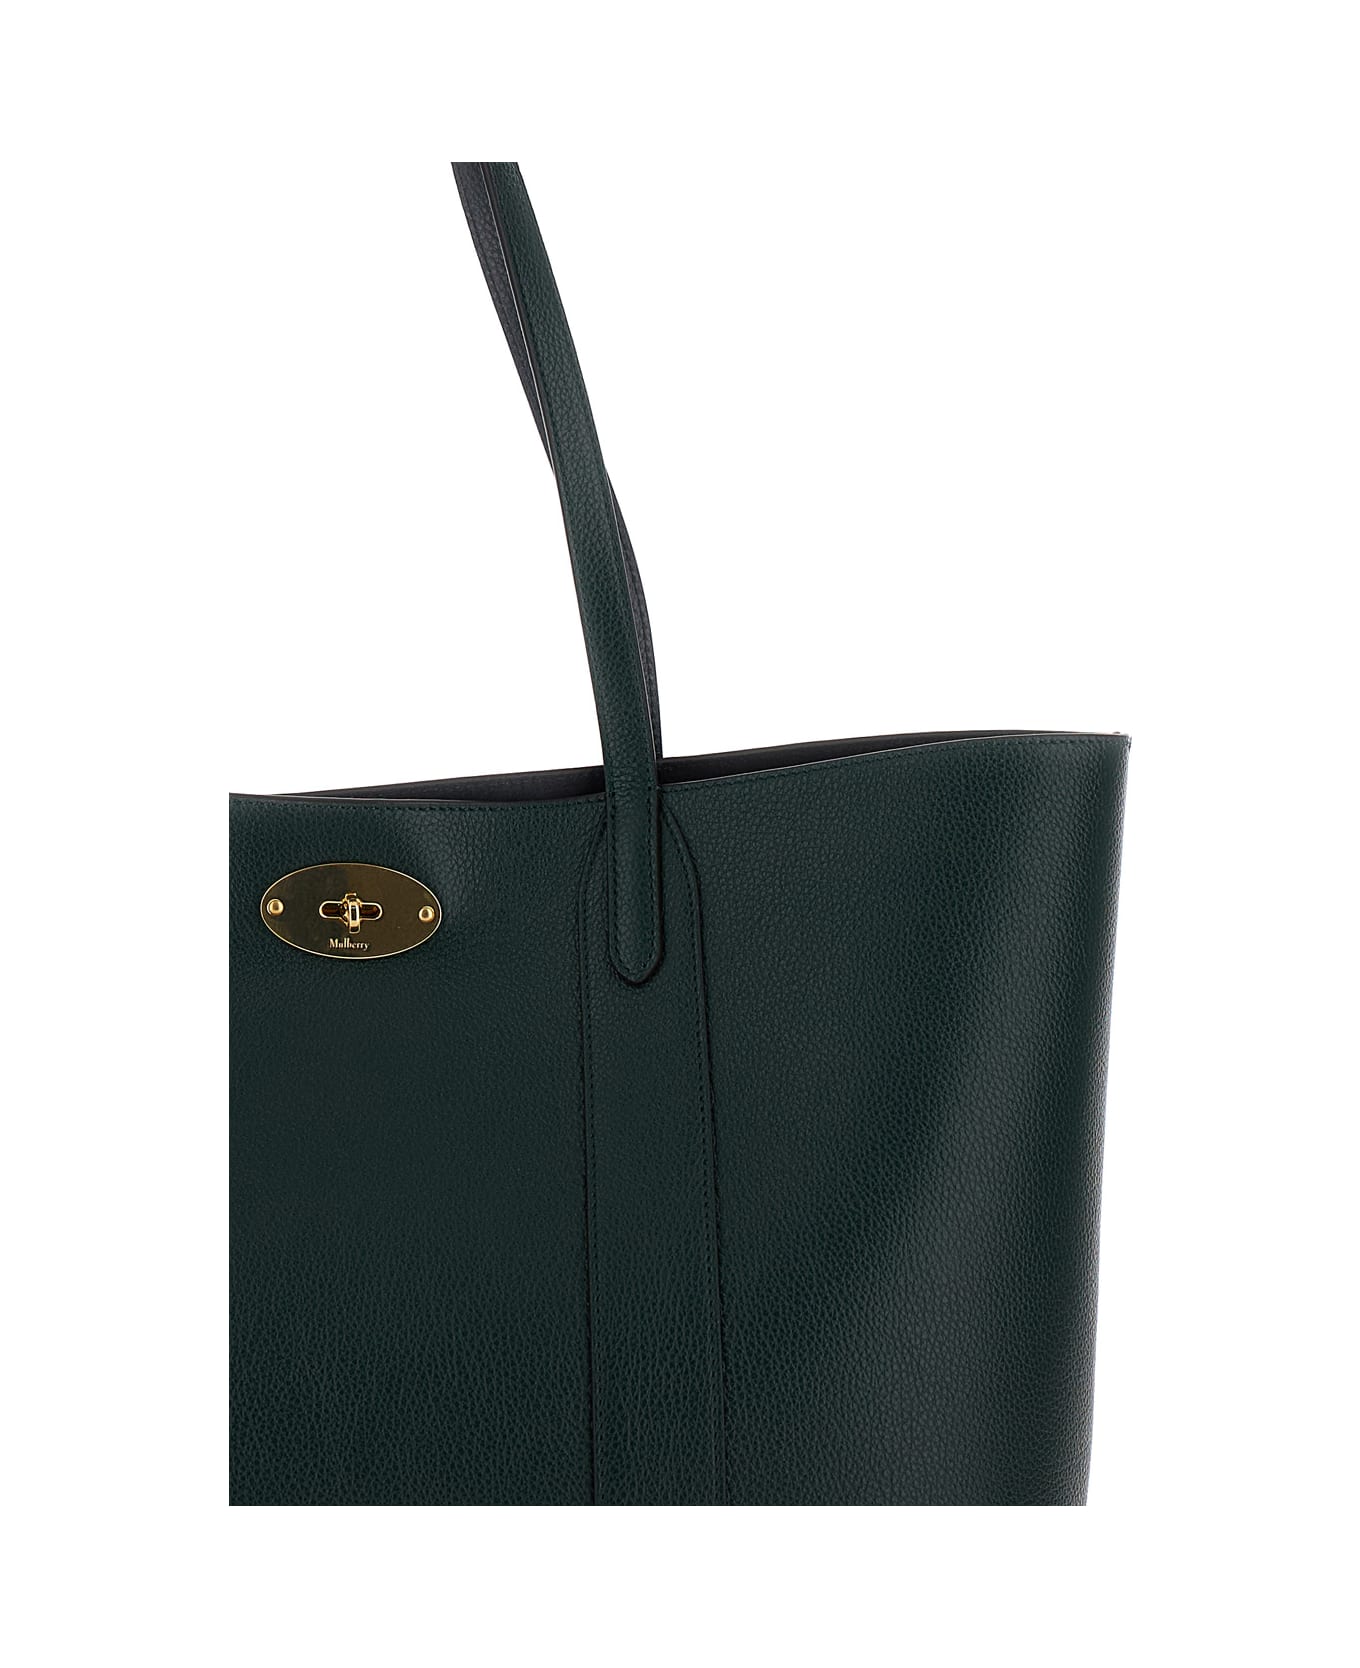 Mulberry 'bayswater Small' Green Tote Bag With Postman's Lock Closure In Leather Woman - Green トートバッグ